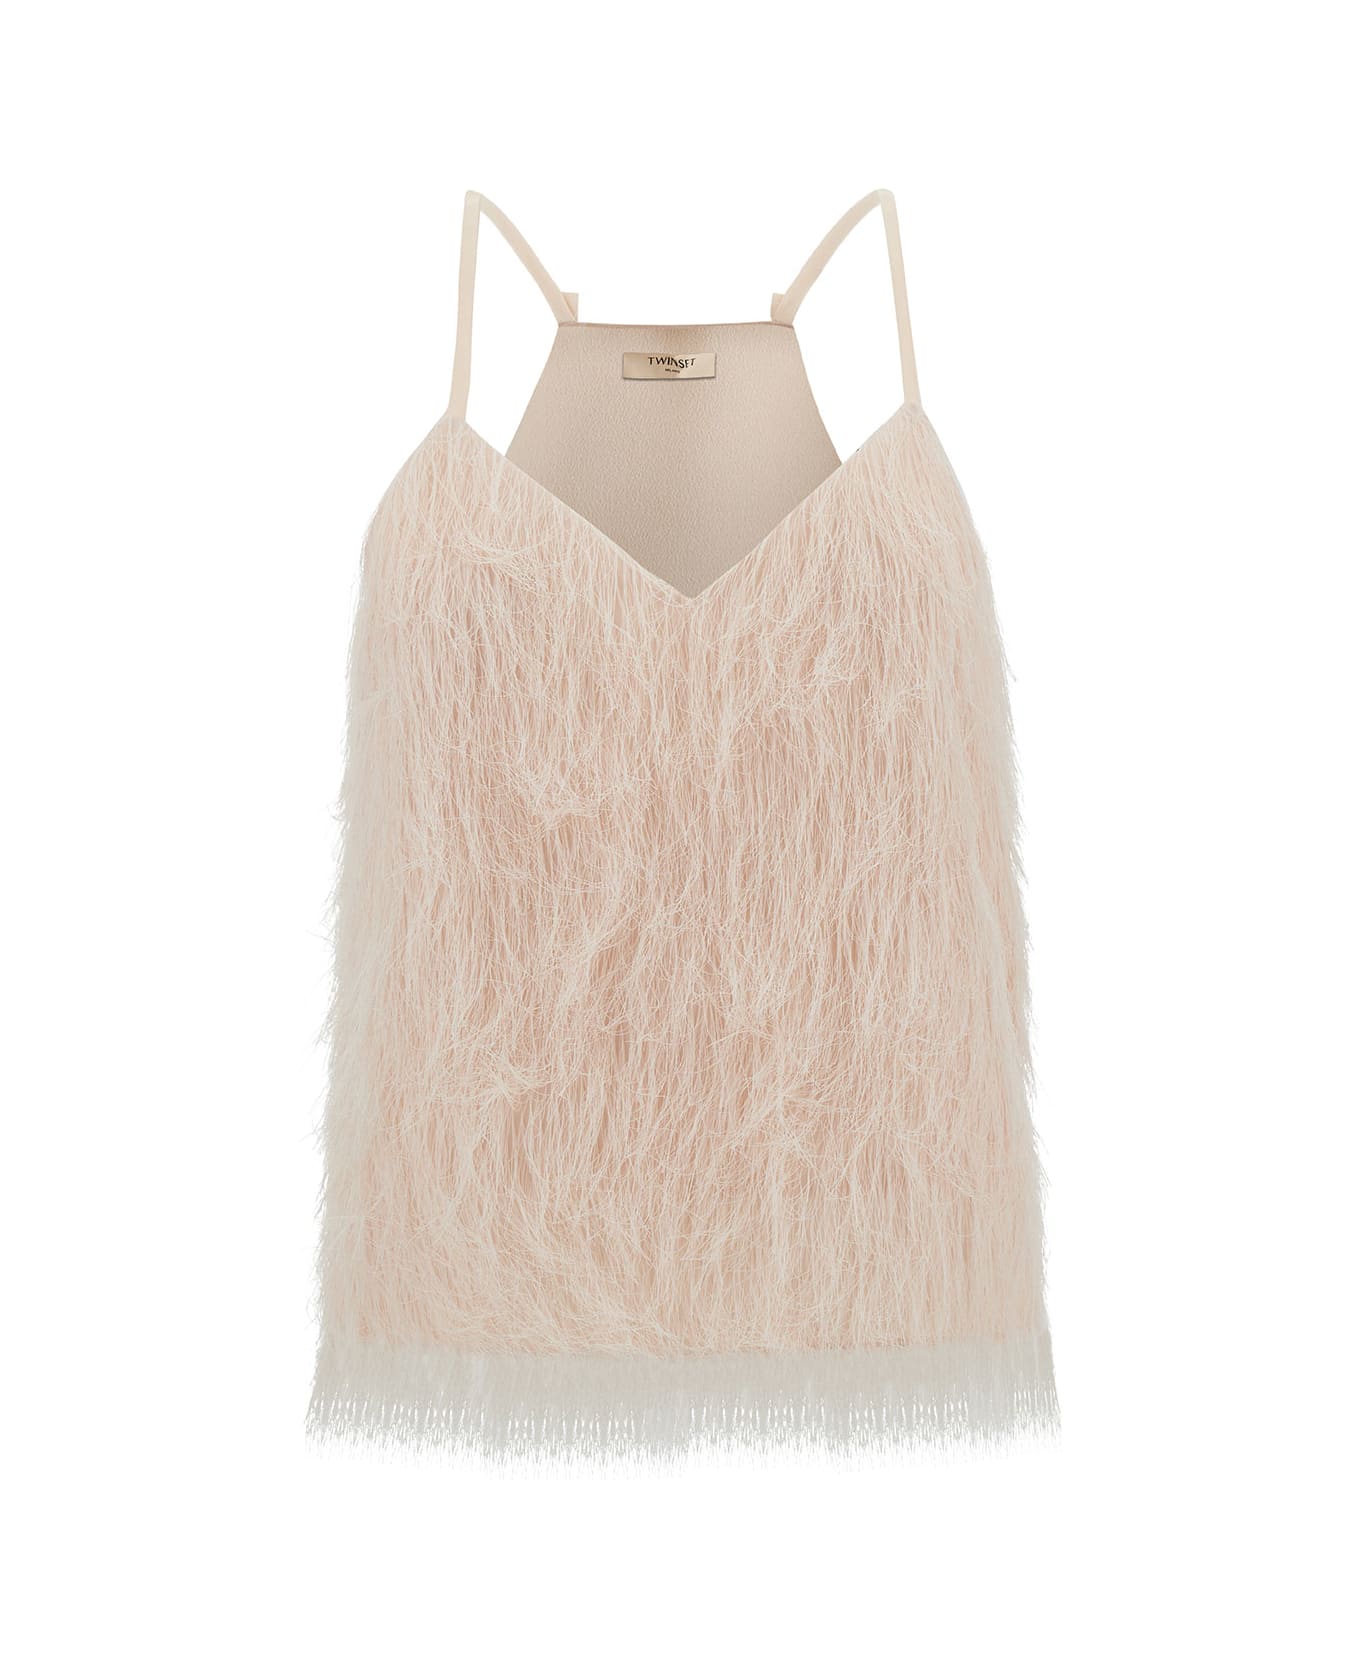 TwinSet Light Pink Top With All-over Feathers In Tech Fabric Woman - LIGHT PINK キャミソール